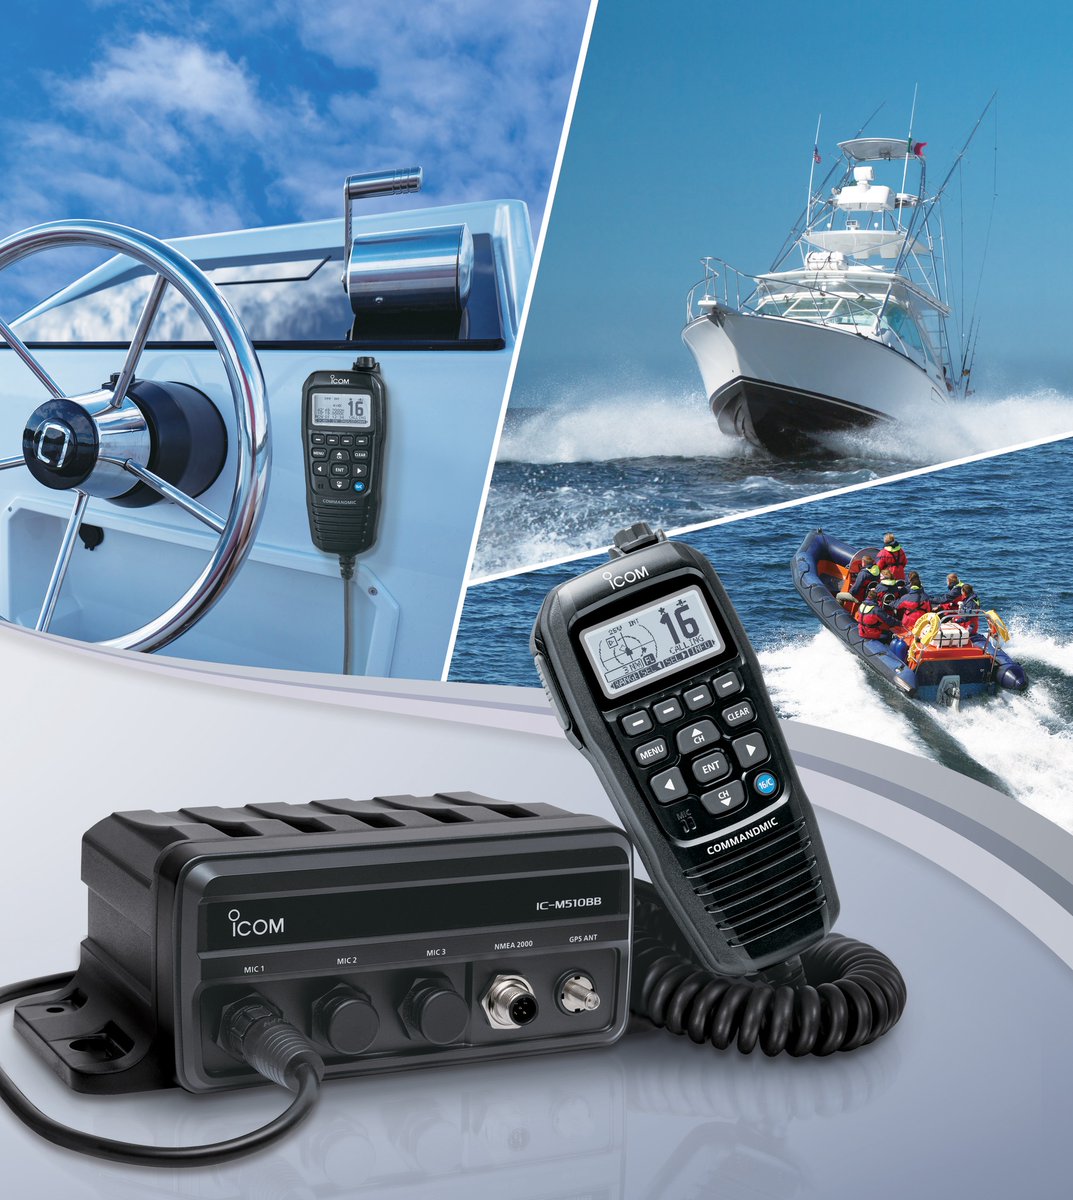 Upgrade your helm with the IC-M510BB Black Box VHF Radio. This sleek radio installs out of sight, keeping your helm clear and organized. Plus, control it from virtually anywhere on board with the option of up to three CommandMic’s. icomuk.co.uk/IC-M510BB_Blac… #icom #vhf #marine